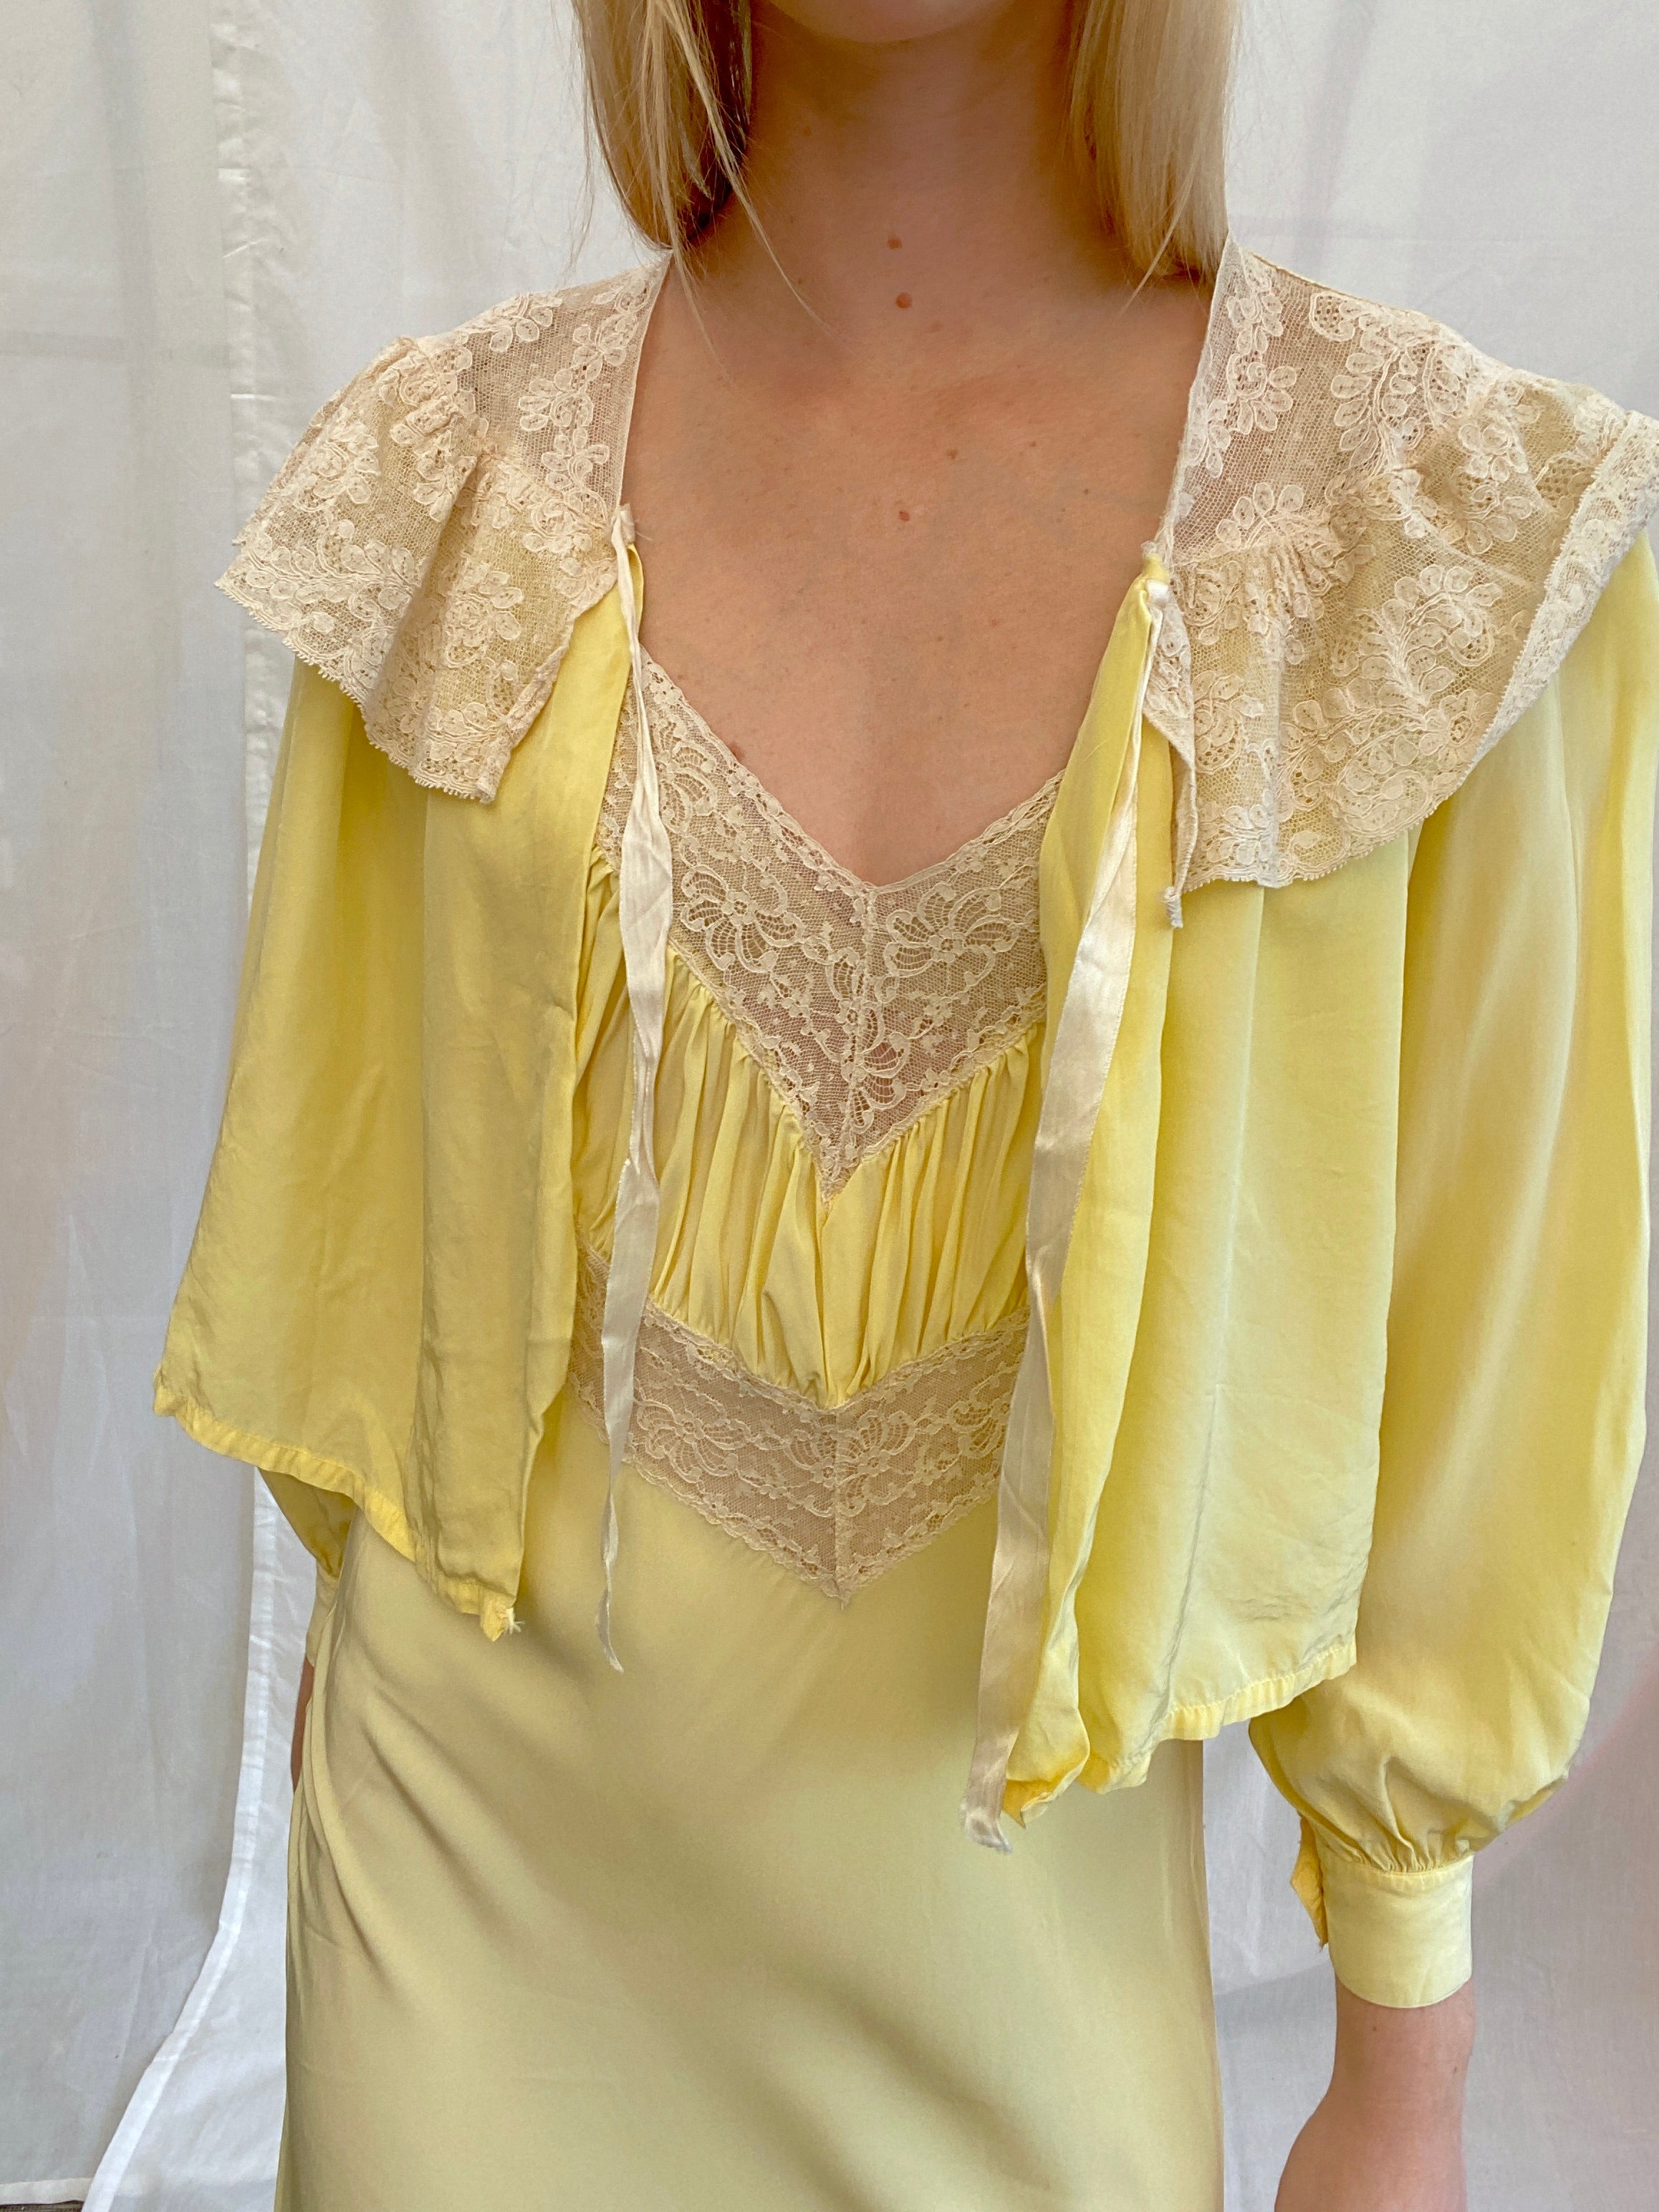 1940's Yellow Slip and Bed Jacket Set